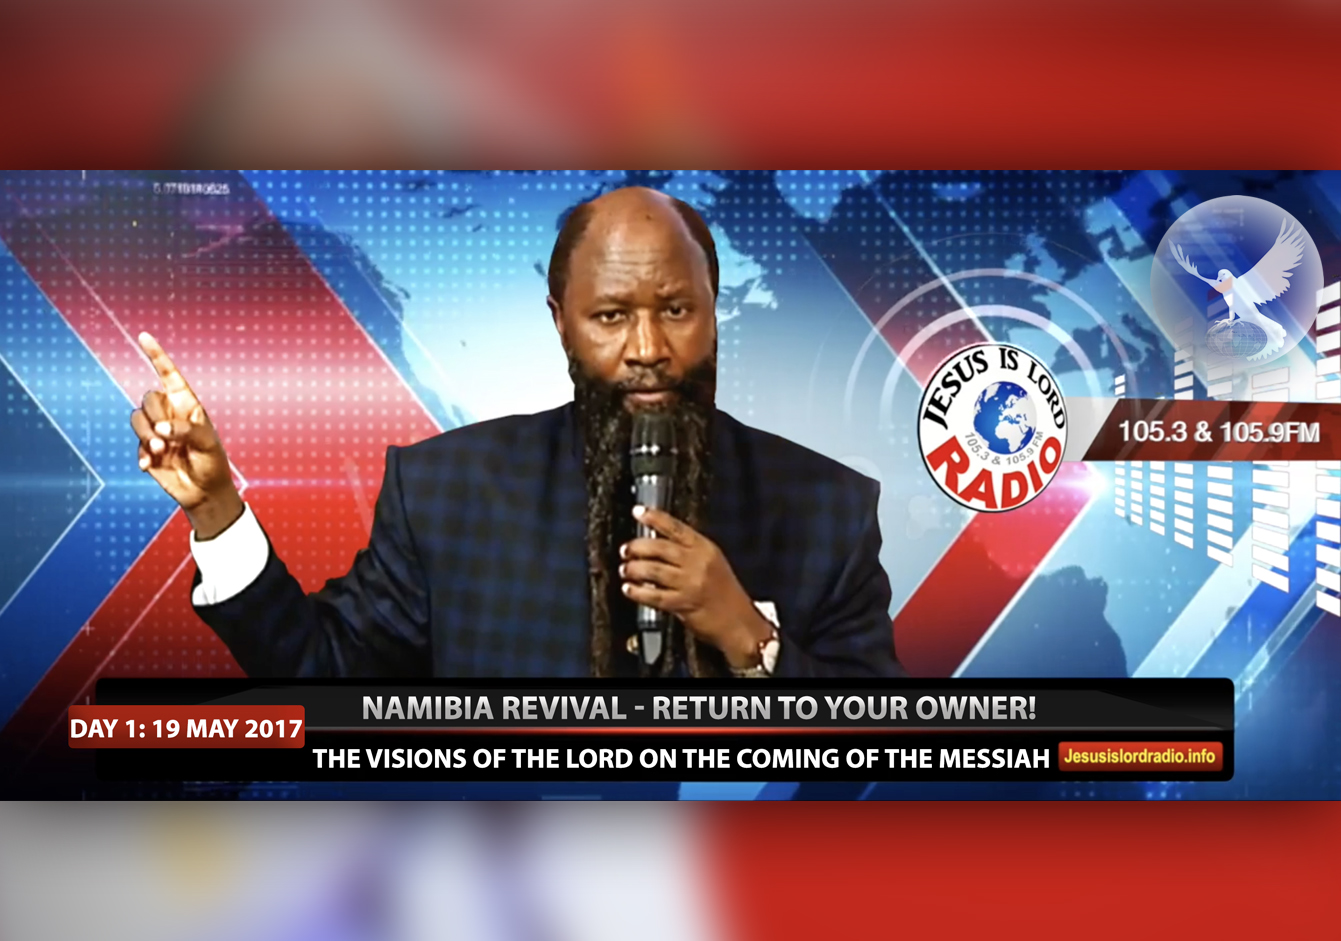 EPISODE 79 - NAMIBIA REVIVAL - RETURN TO YOUR OWNER - DAY 1 (19MAY2017) - PROPHET DR. OWUOR